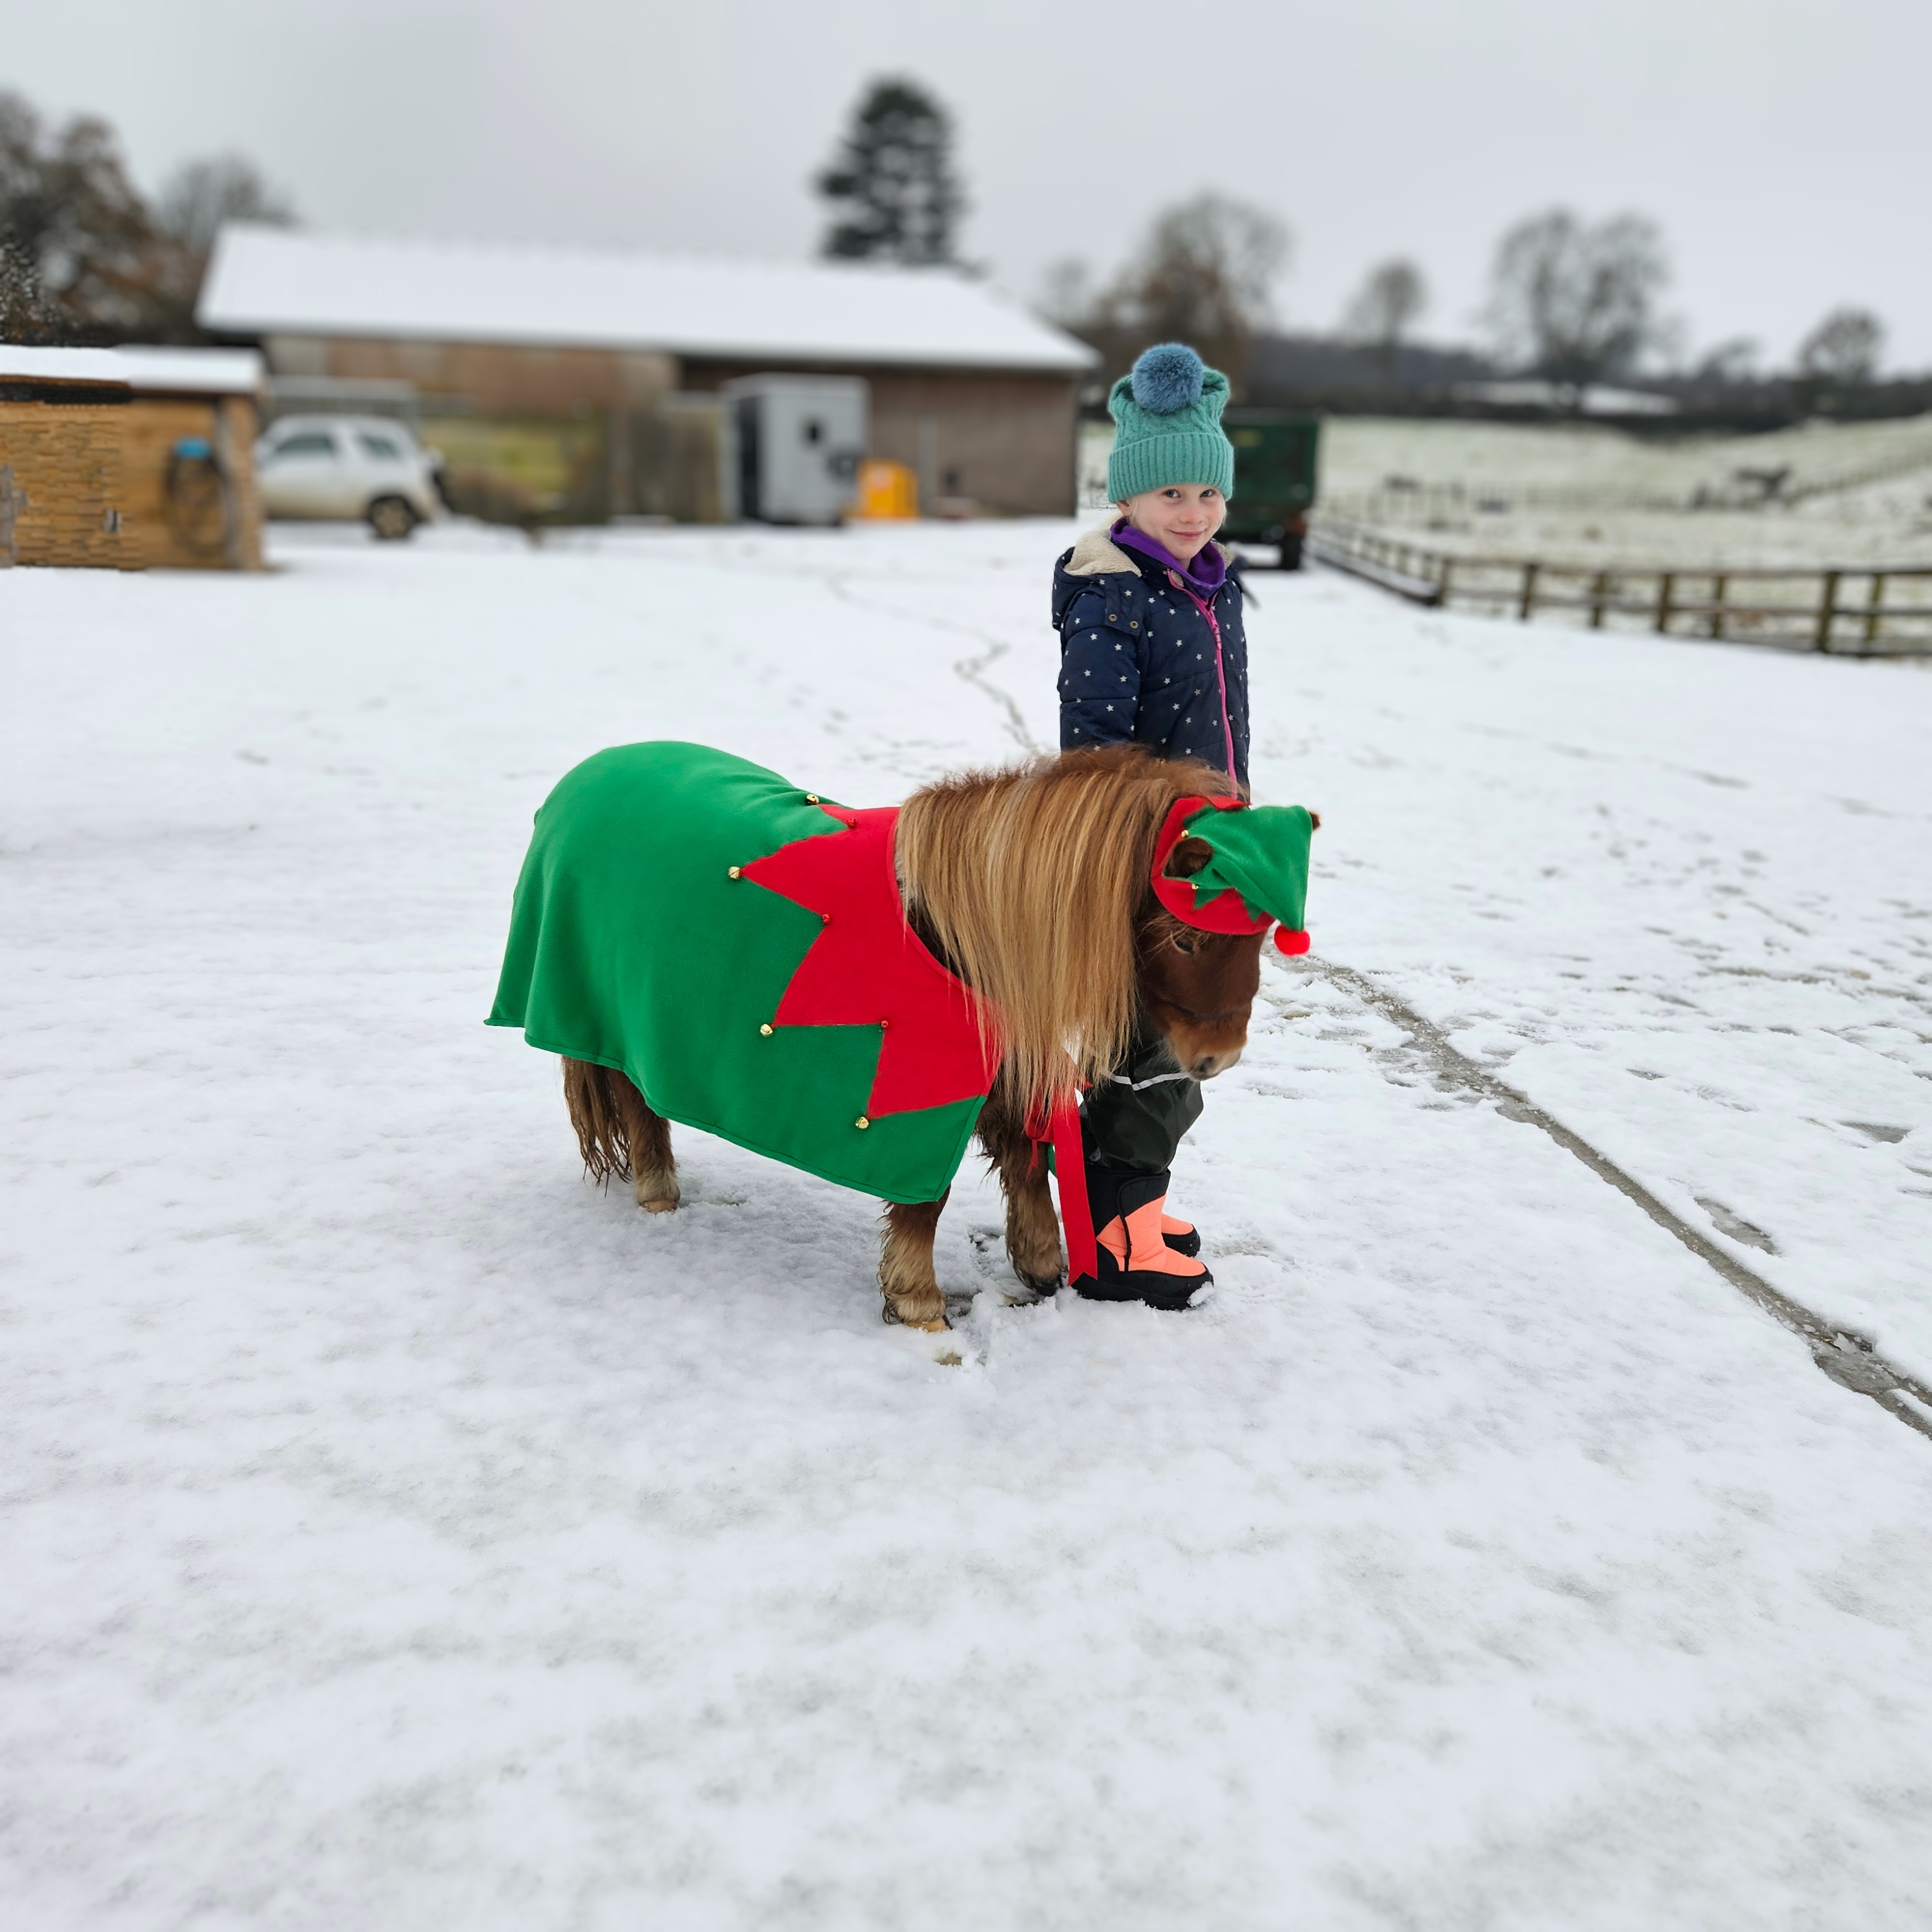 The Not-So-Secret Diary of Diva the Shetland Pony - Dressing Up Is Fun!